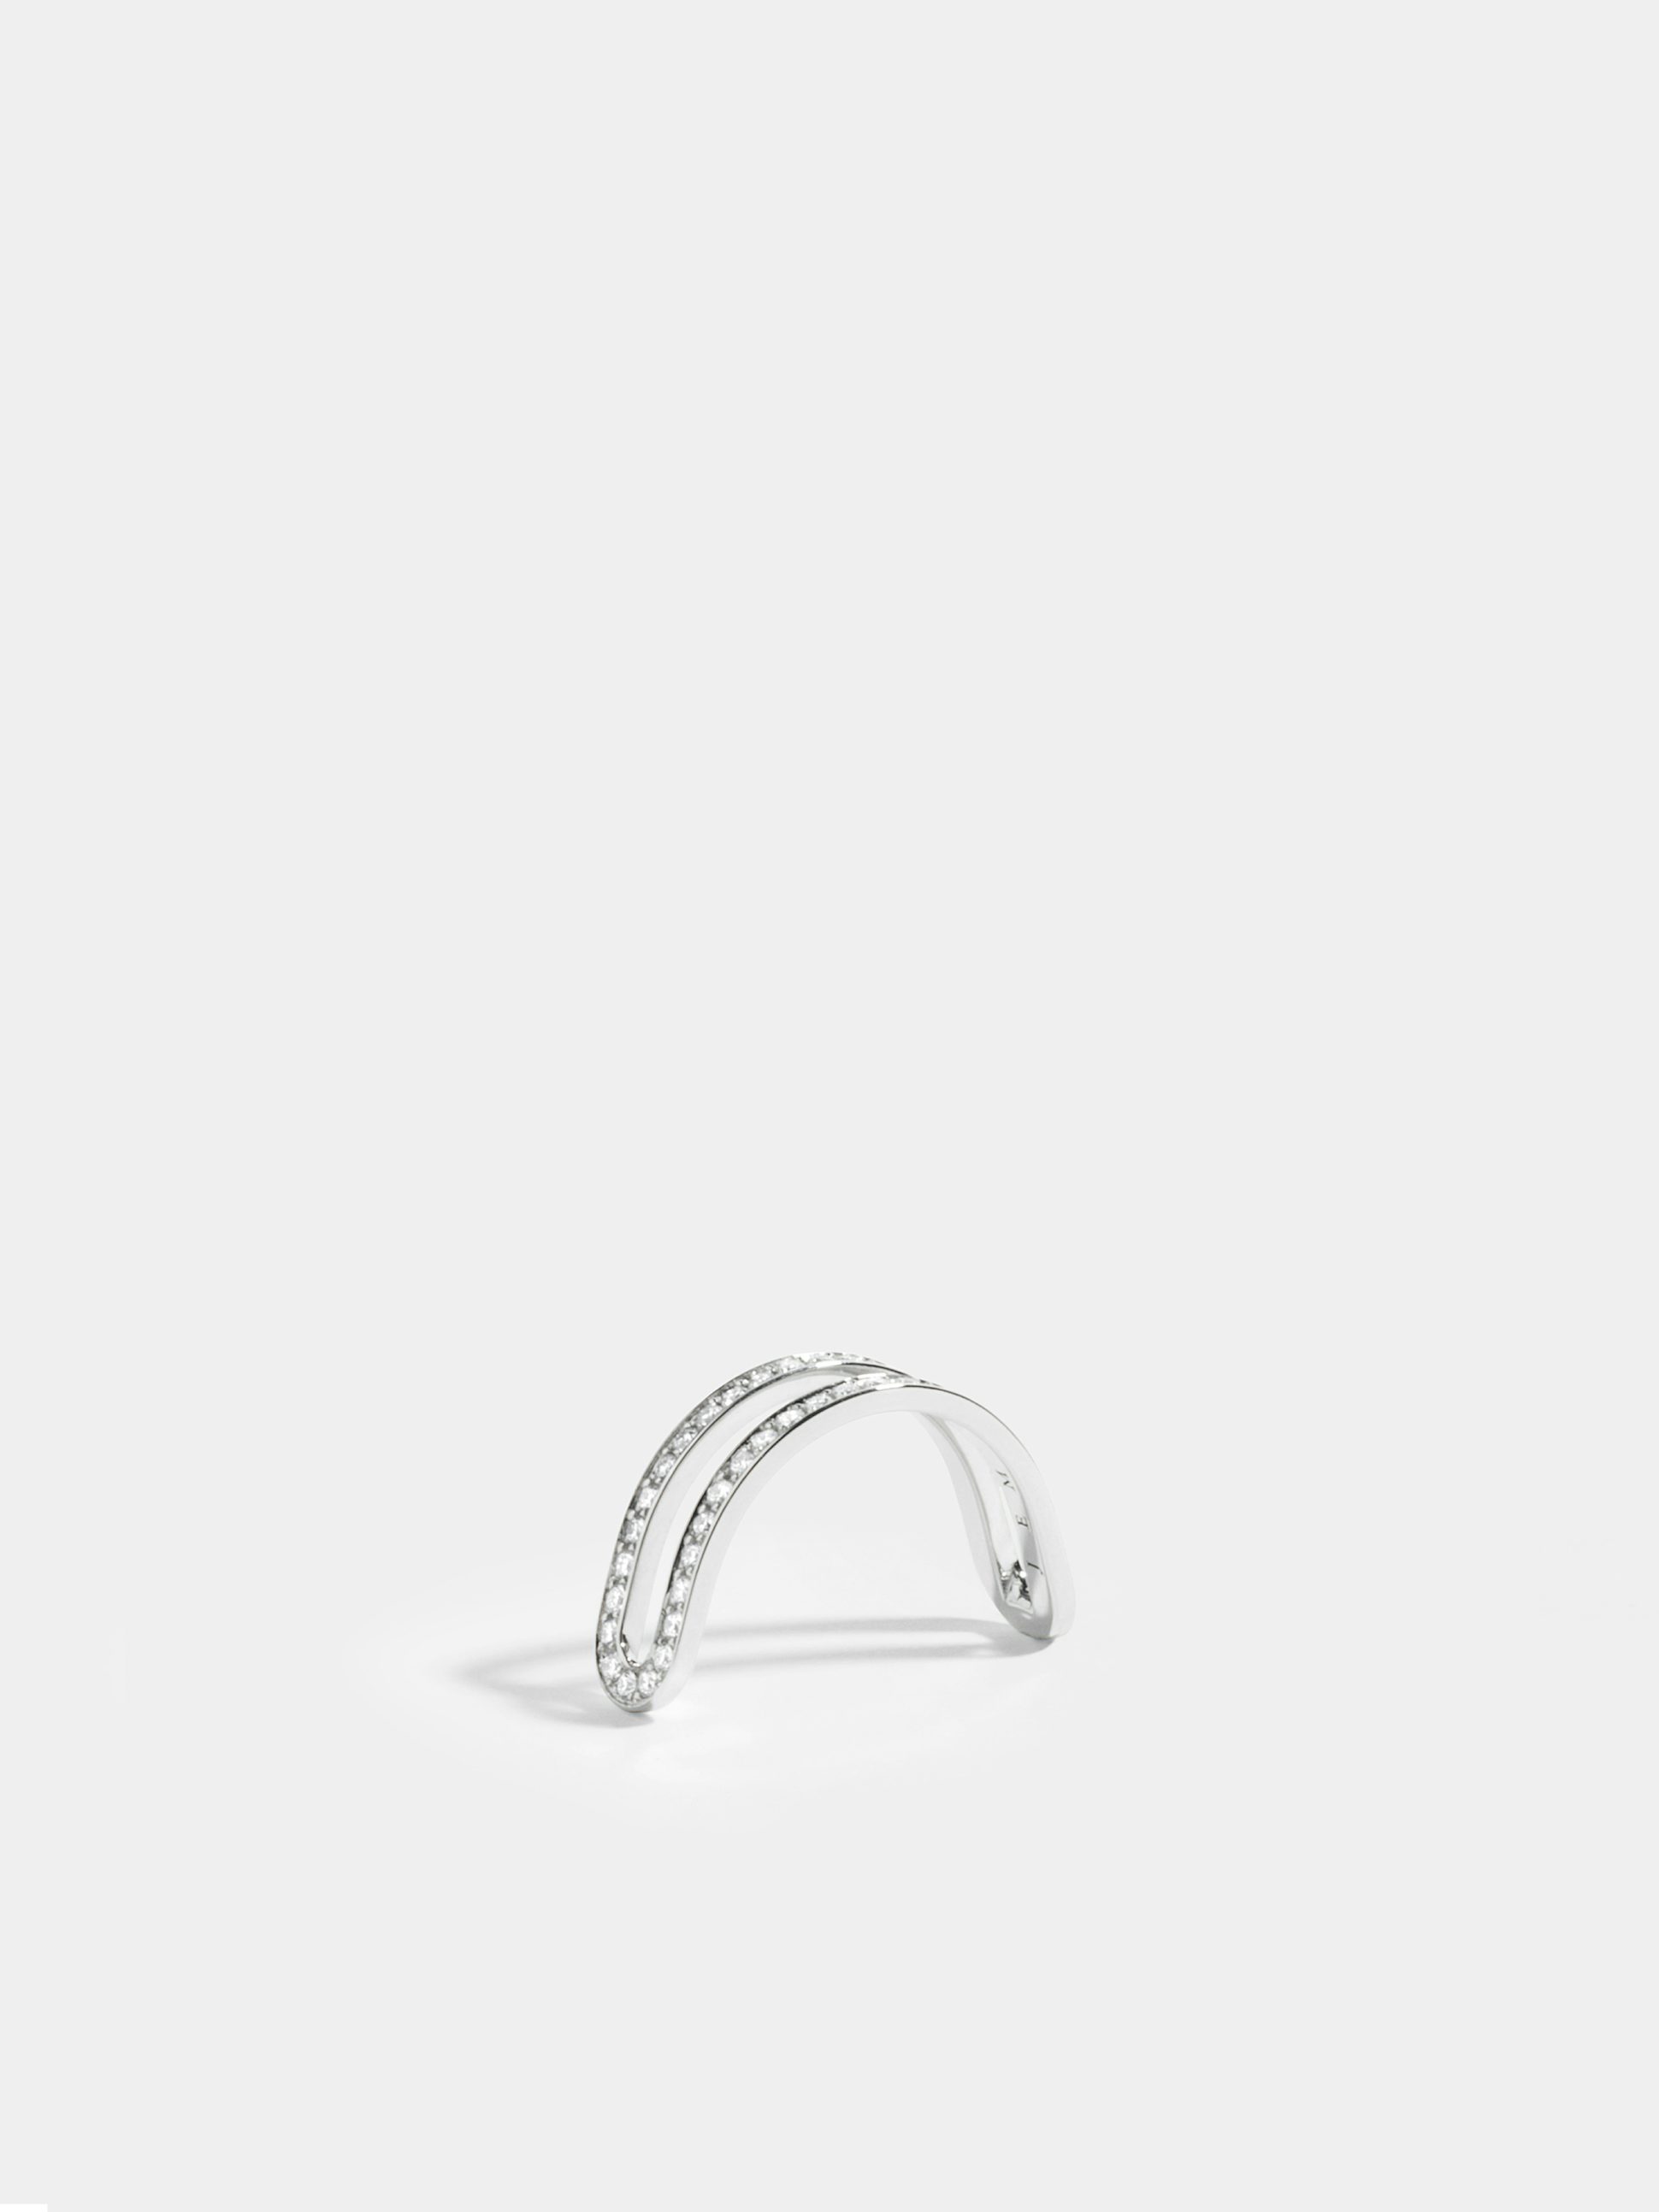 Étreintes simple half-ring in 18k Fairmined ethical white gold, paved with lab-grown diamonds.